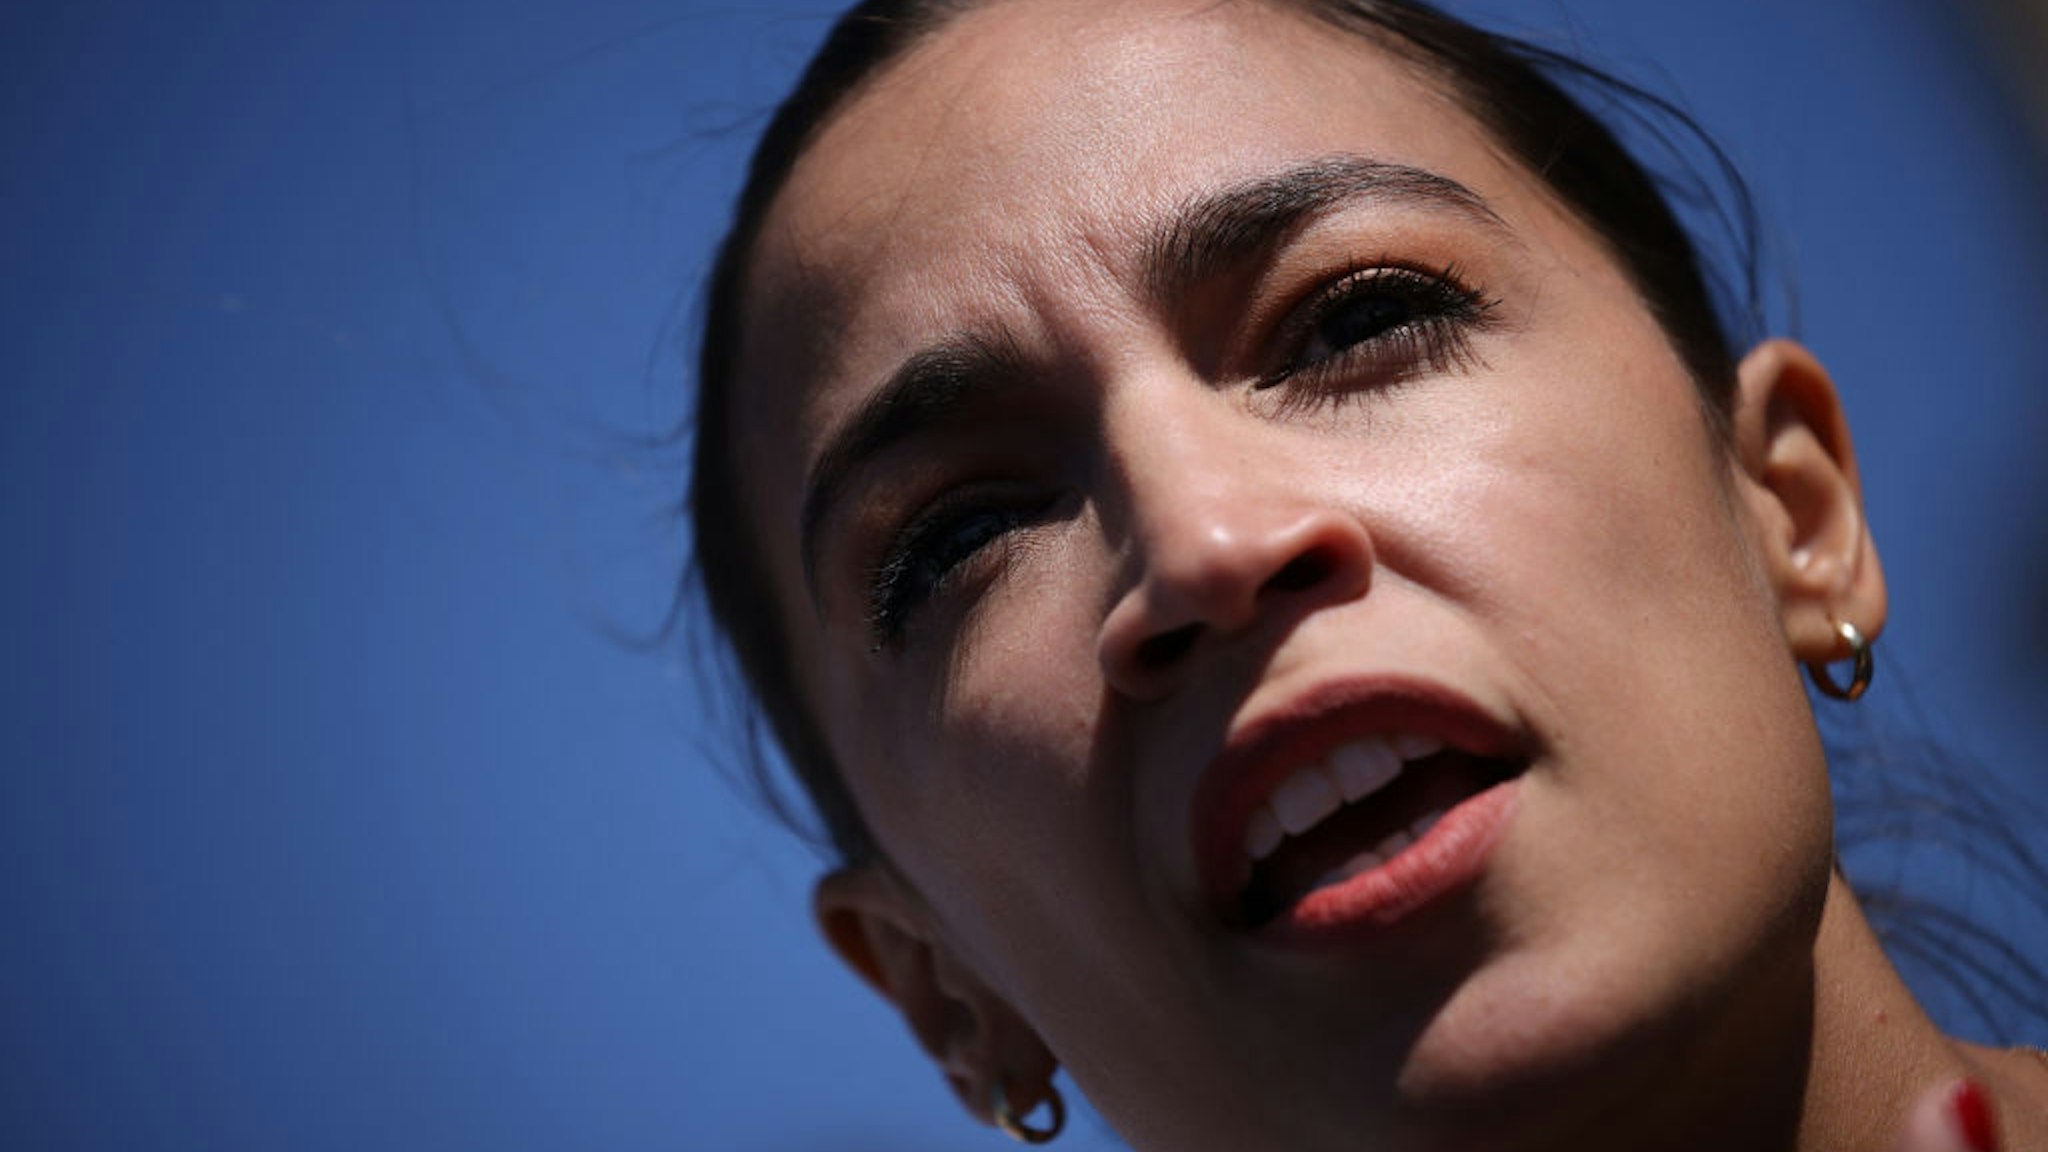 Rep. Alexandria Ocasio-Cortez (D-NY) speaks during an event outside Union Station June 16, 2021 in Washington, DC.